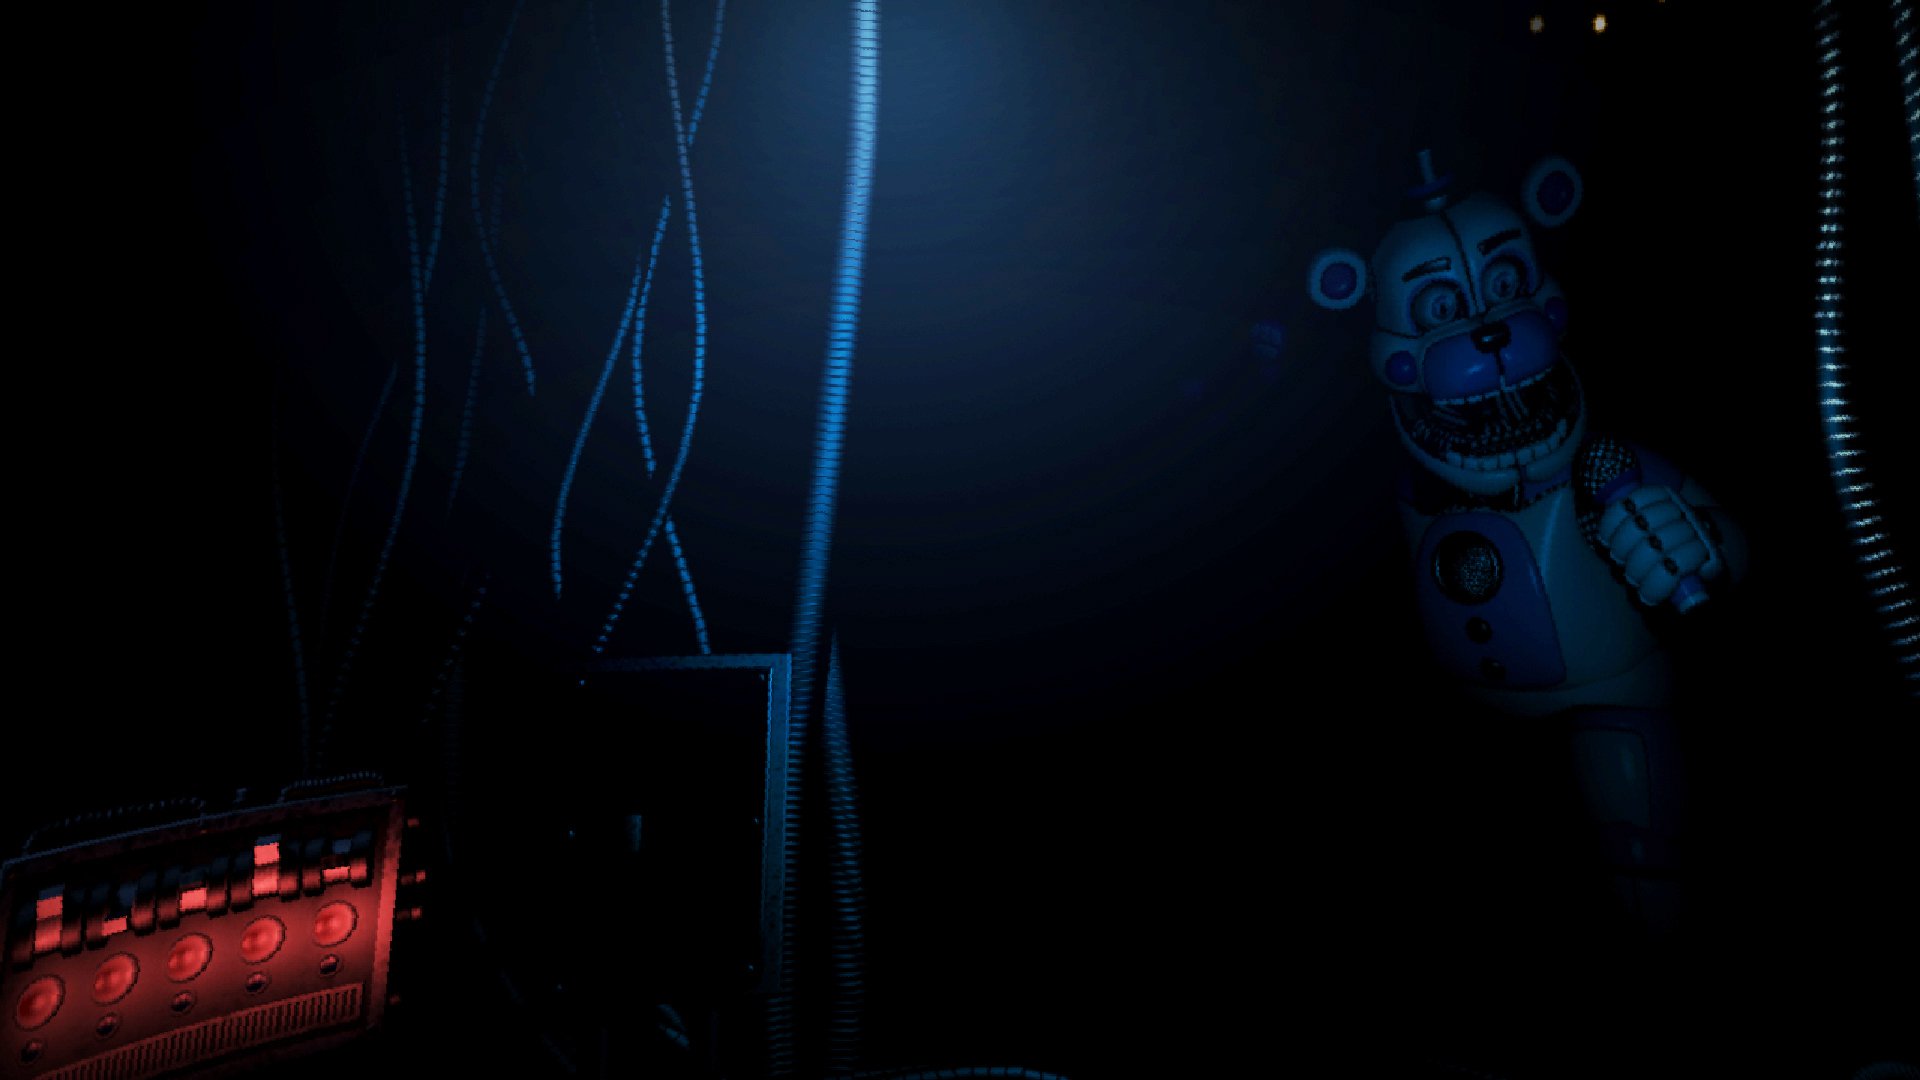 “Five Nights at Freddy’s: Sister Location” Set for October 2016 - Debatable, Though, Judging Previous Games' Records